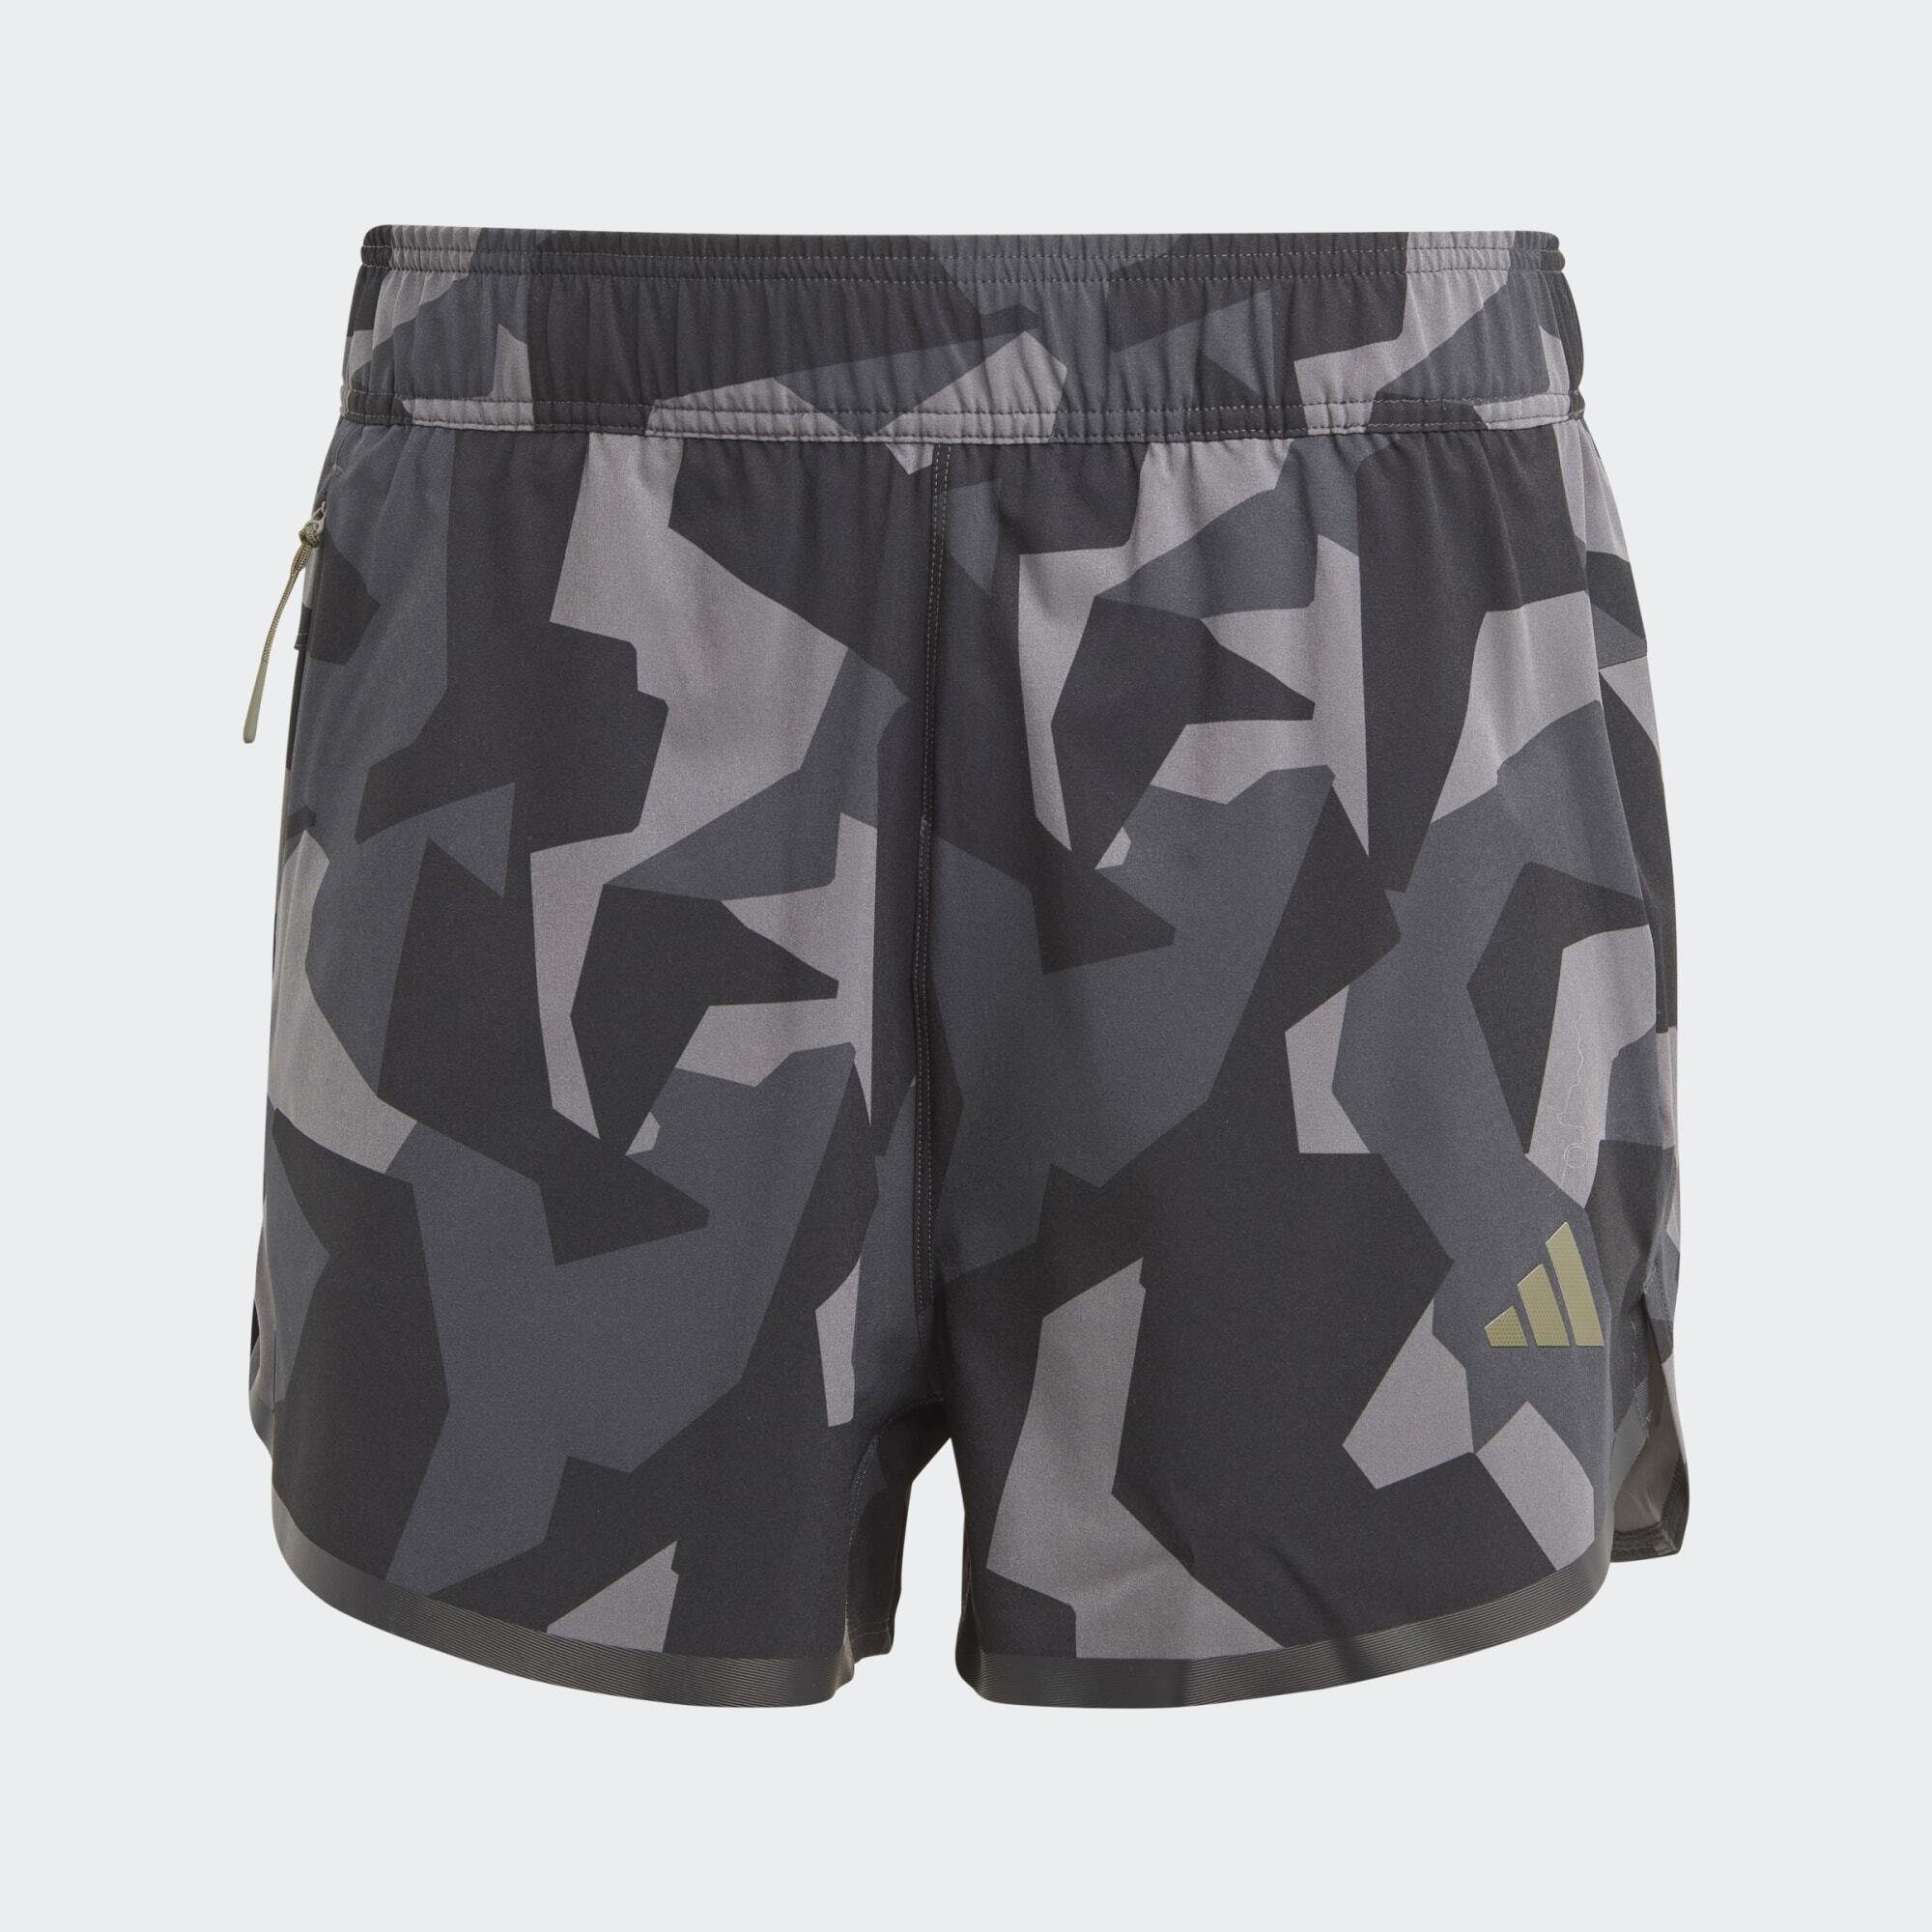 Grey SHORTS / / FOR Five SERIES PRO Carbon Black TRAINING adidas STRENGTH DESIGNED Performance Funktionsshorts